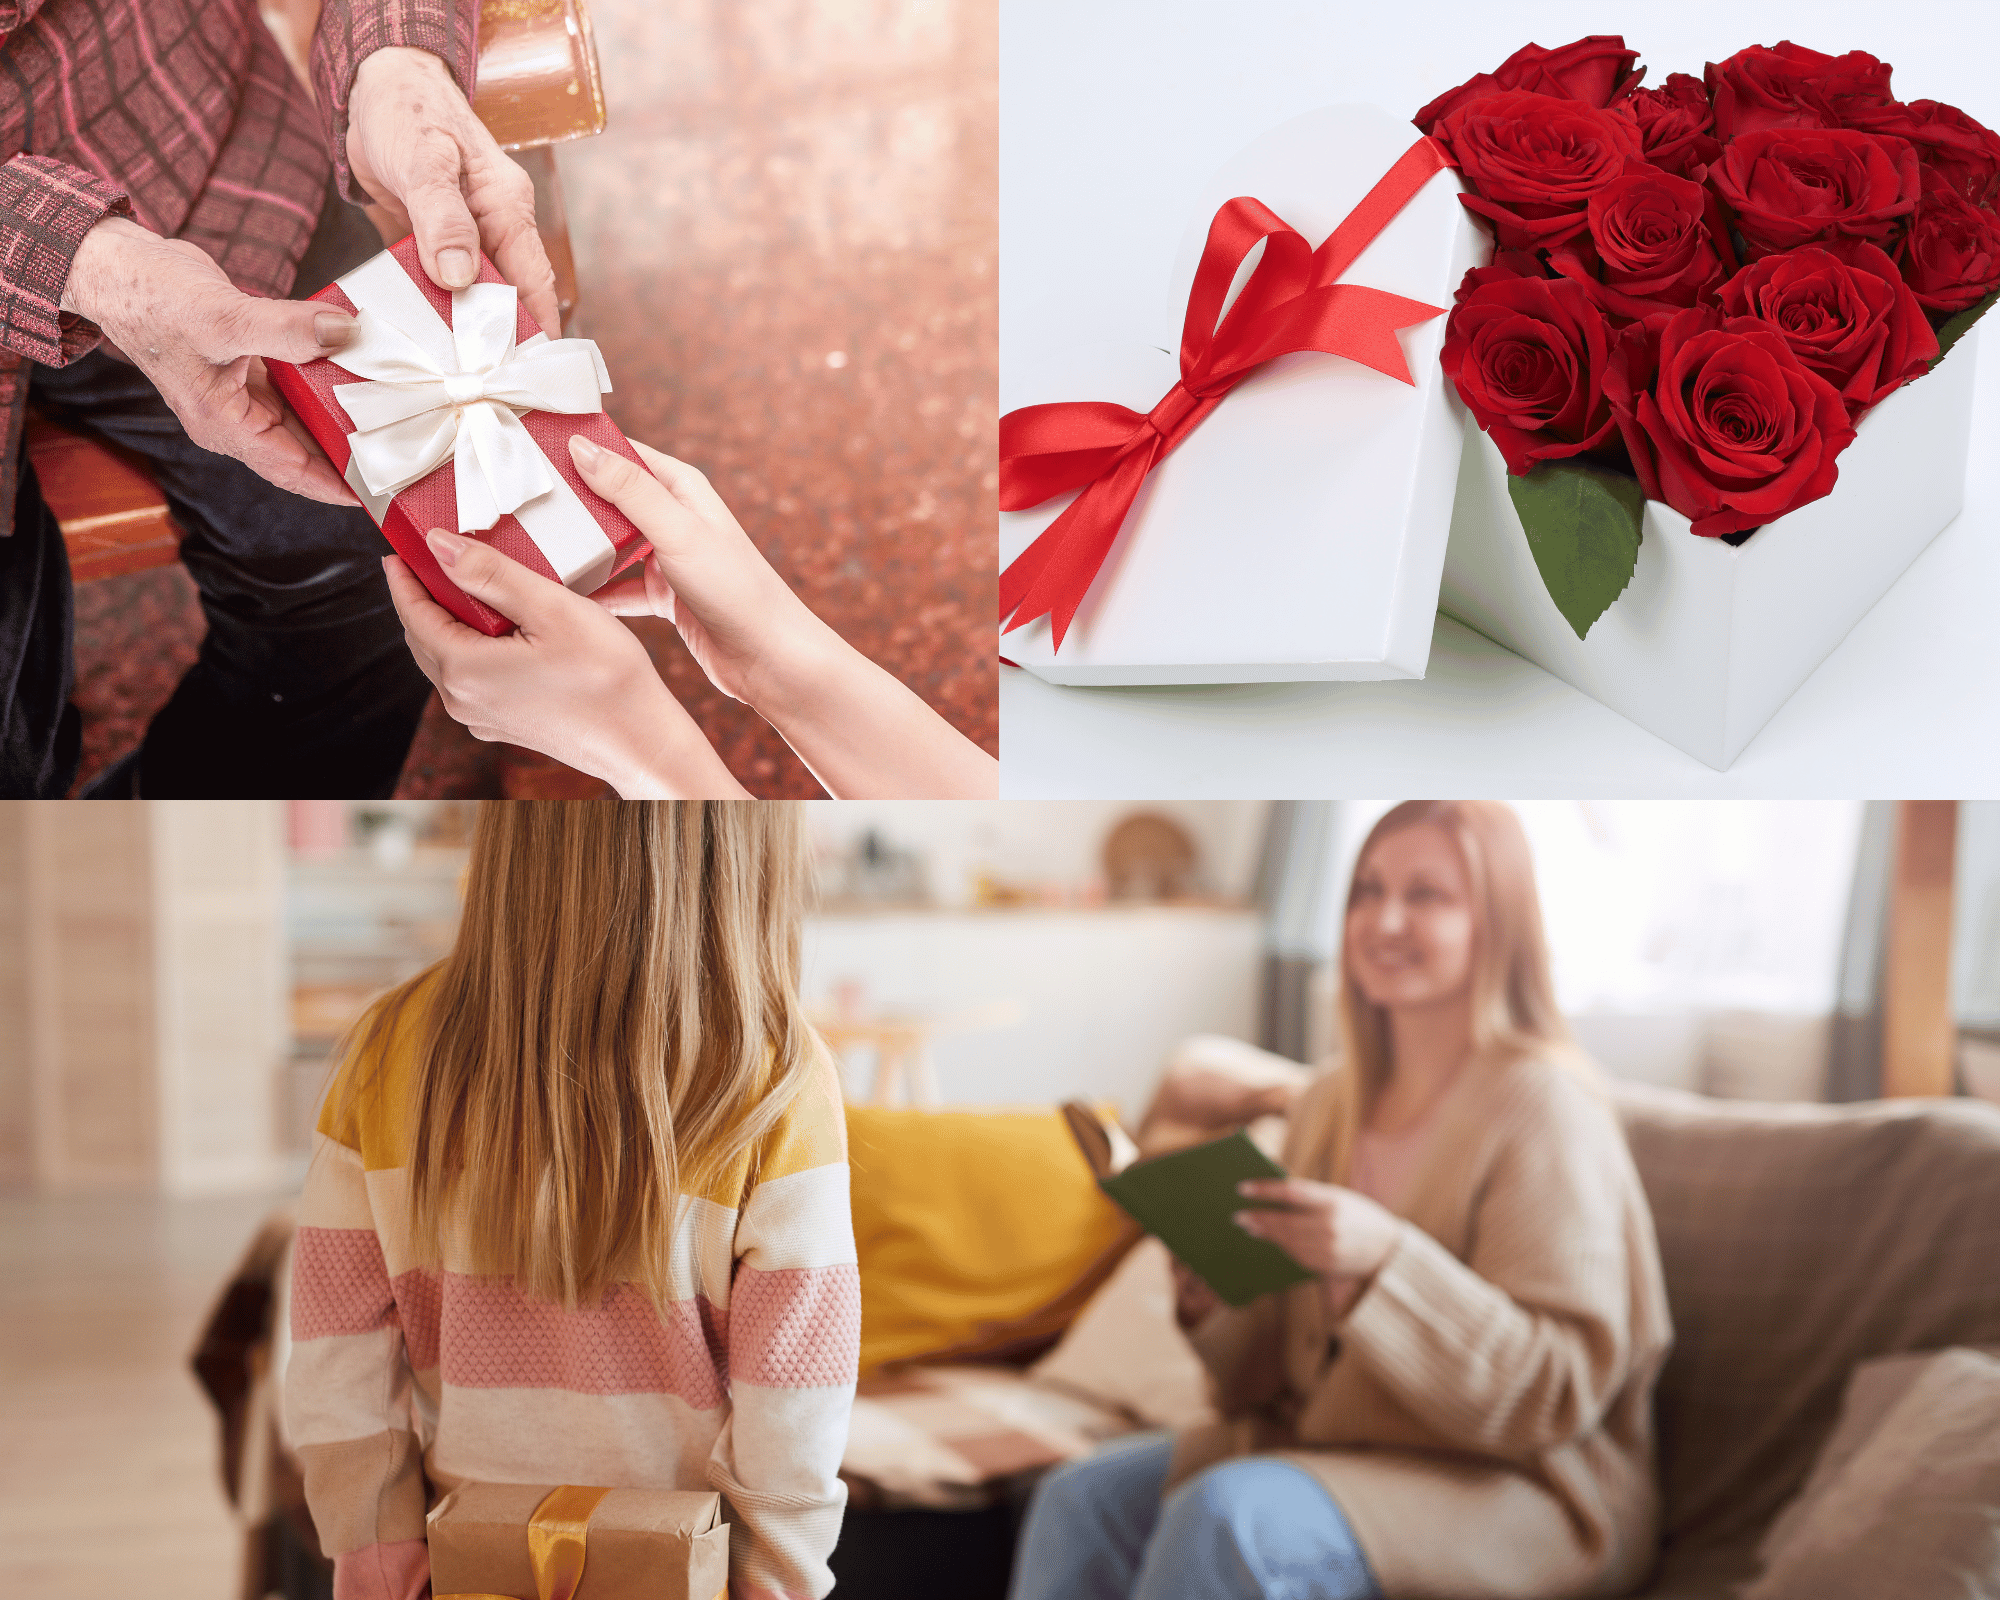 21st Birthday Experience Gifts for Daughter That She’ll Absolutely Love